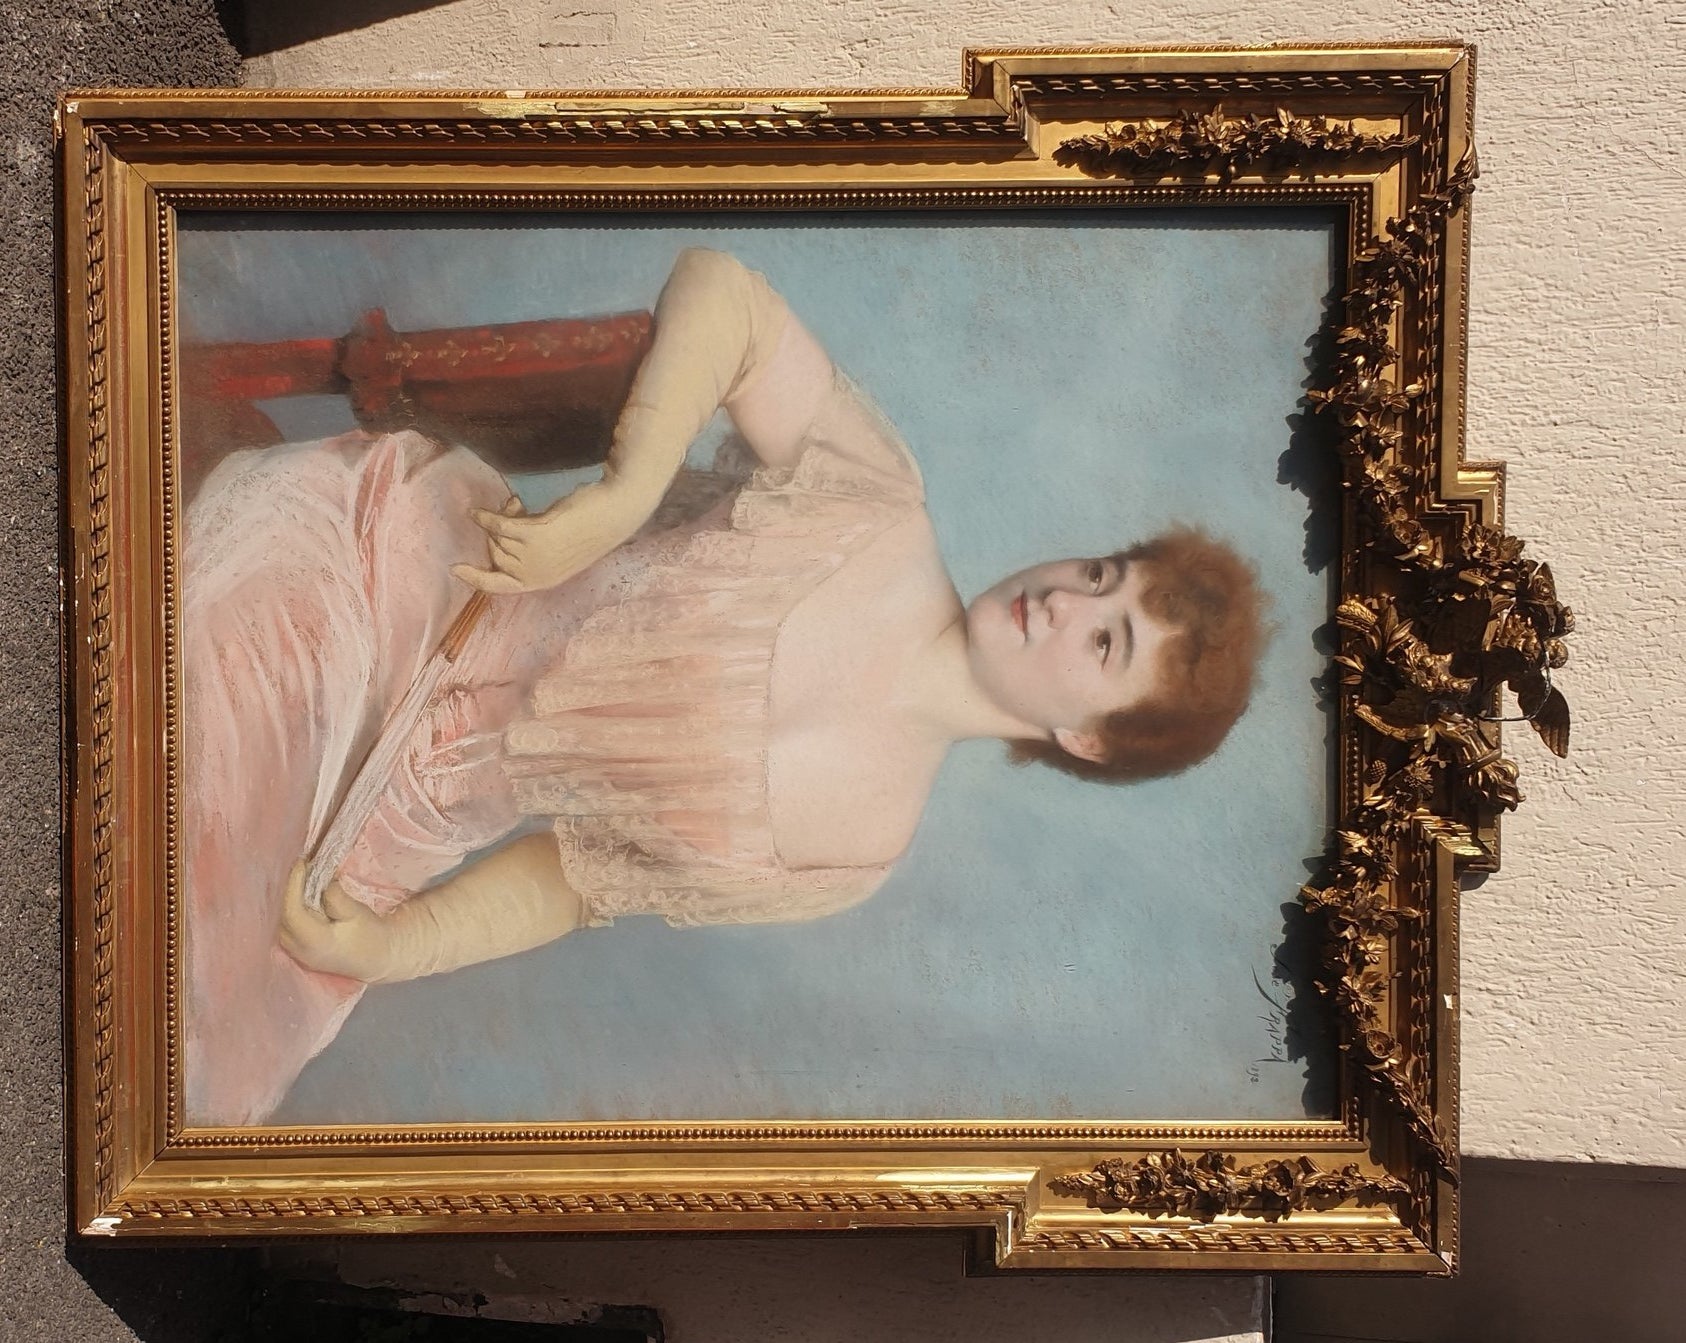 Large pastel portrait of a young woman in a pink dress, seated, with her fan, on a blue background

Frame in gilded stucco (losses and wear) glazed

Pastel signed José Frappa and dated 1892

José Frappa (1854-1904) was a painter and ceramist